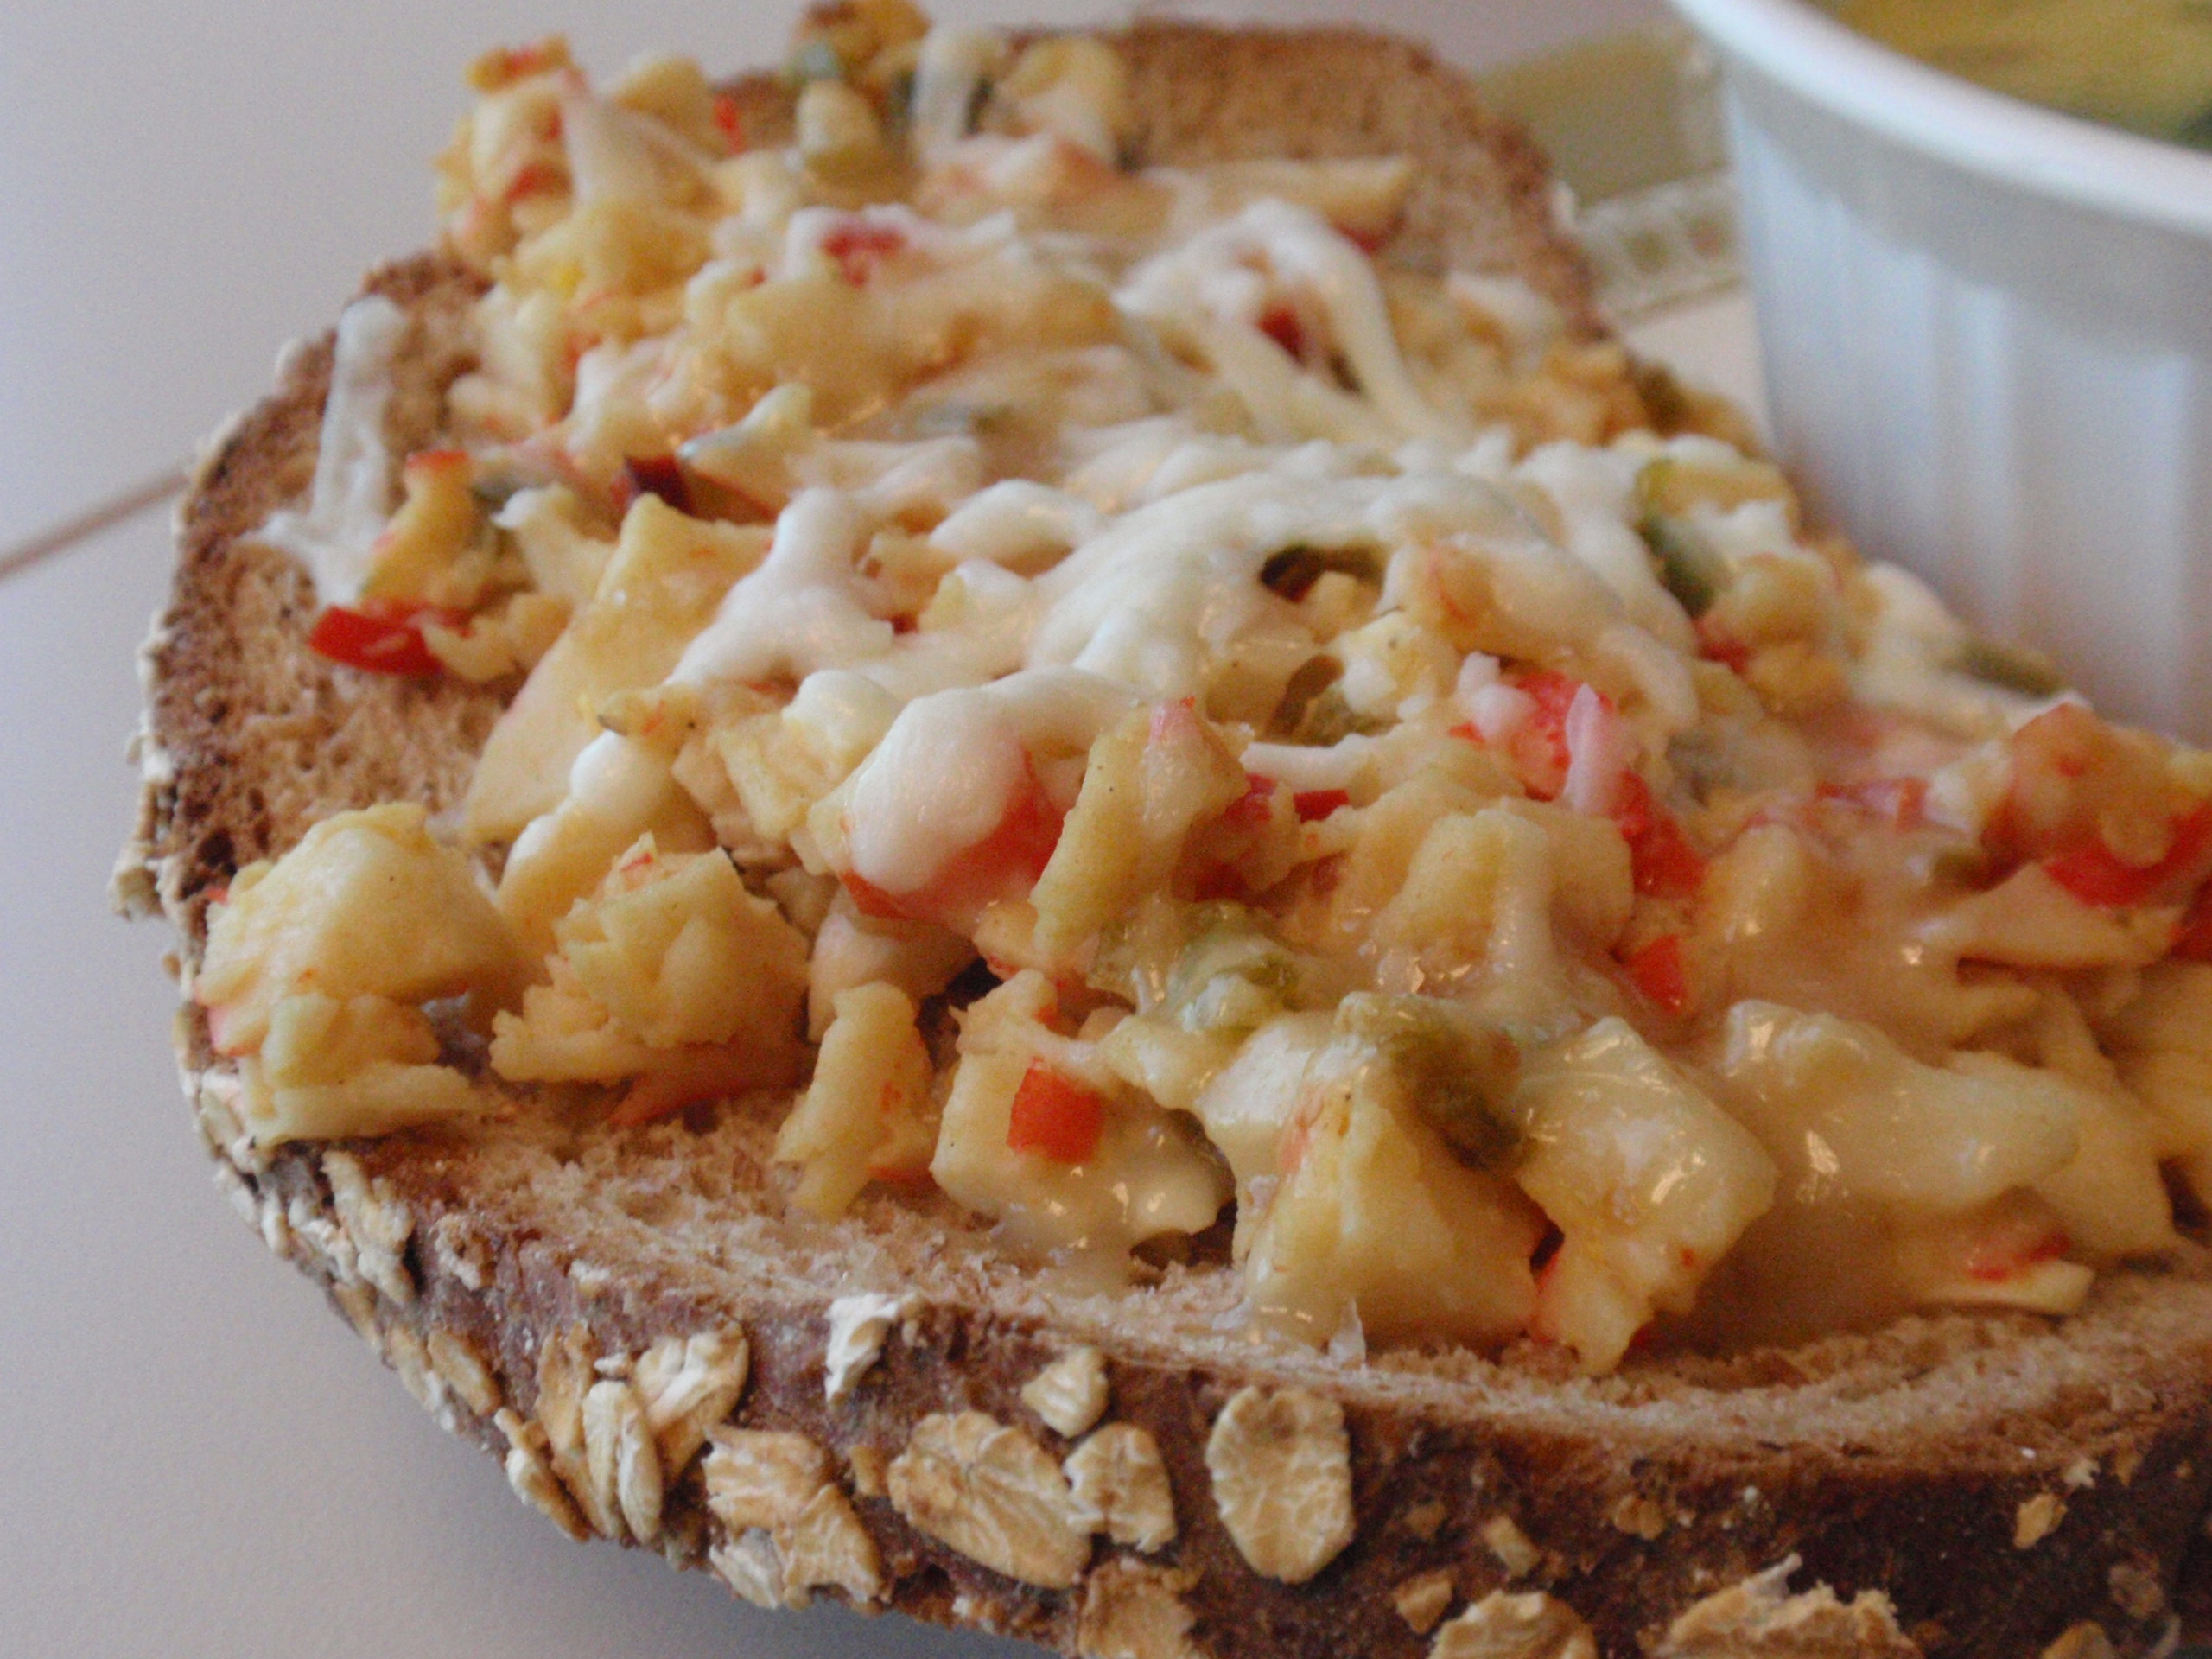 I spread my crab mixture on my low carb bread and added 1/2 ounce smoked gouda, and 1/2 ounce of mozzarella and just popped it in the toaster oven for 5 minutes - yum!